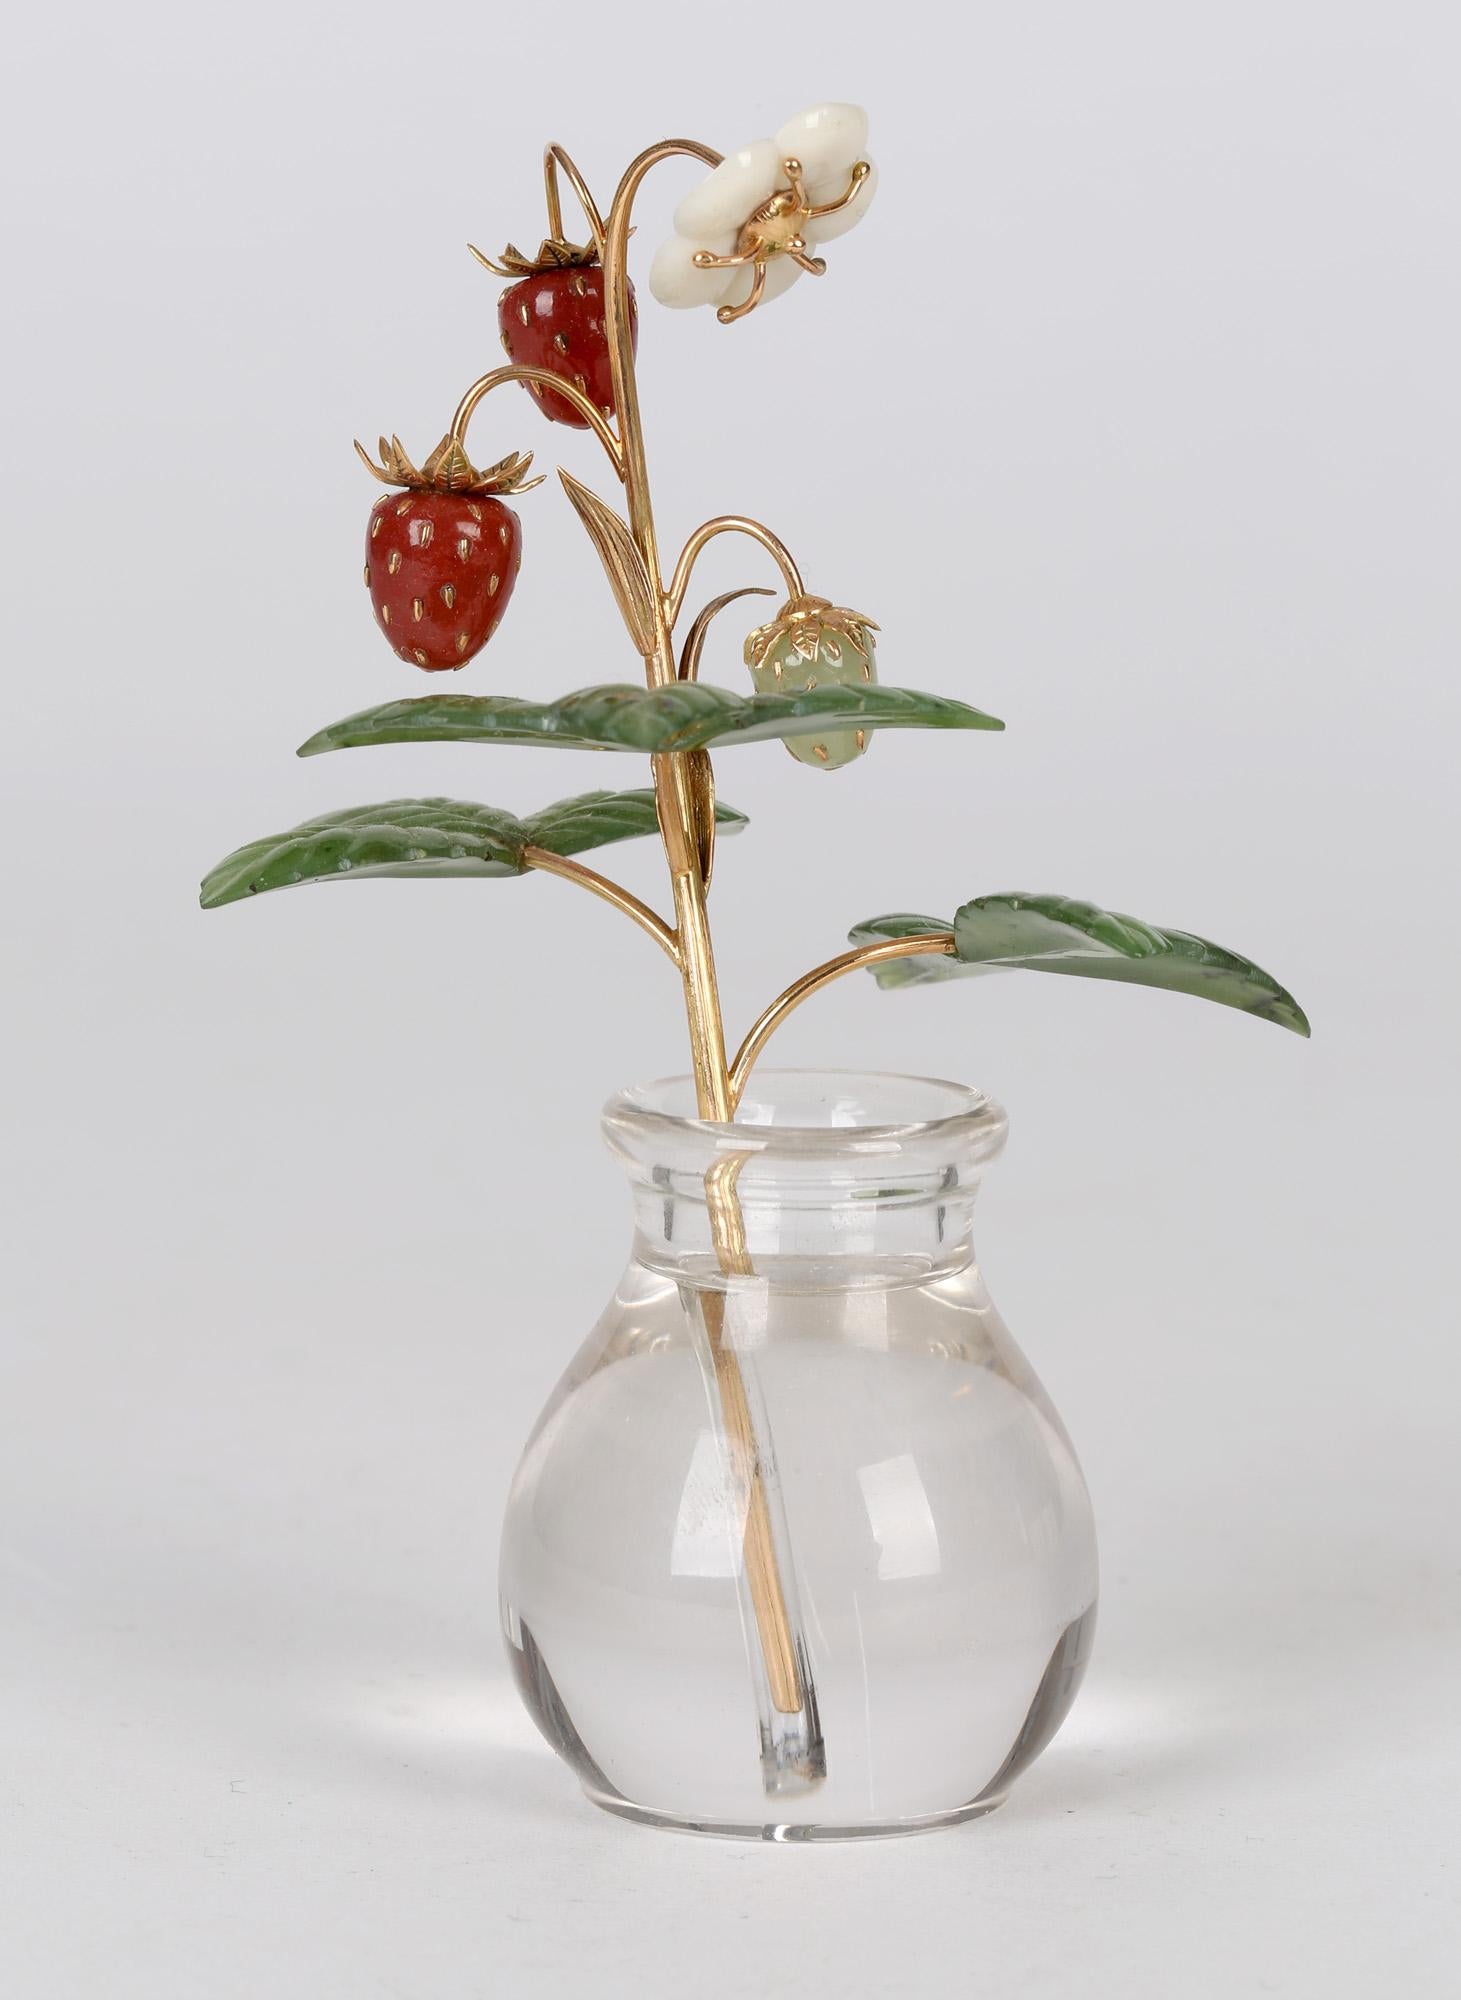 Fabergé Style Exquisite Wild Strawberry Stem with Crystal Vase 2